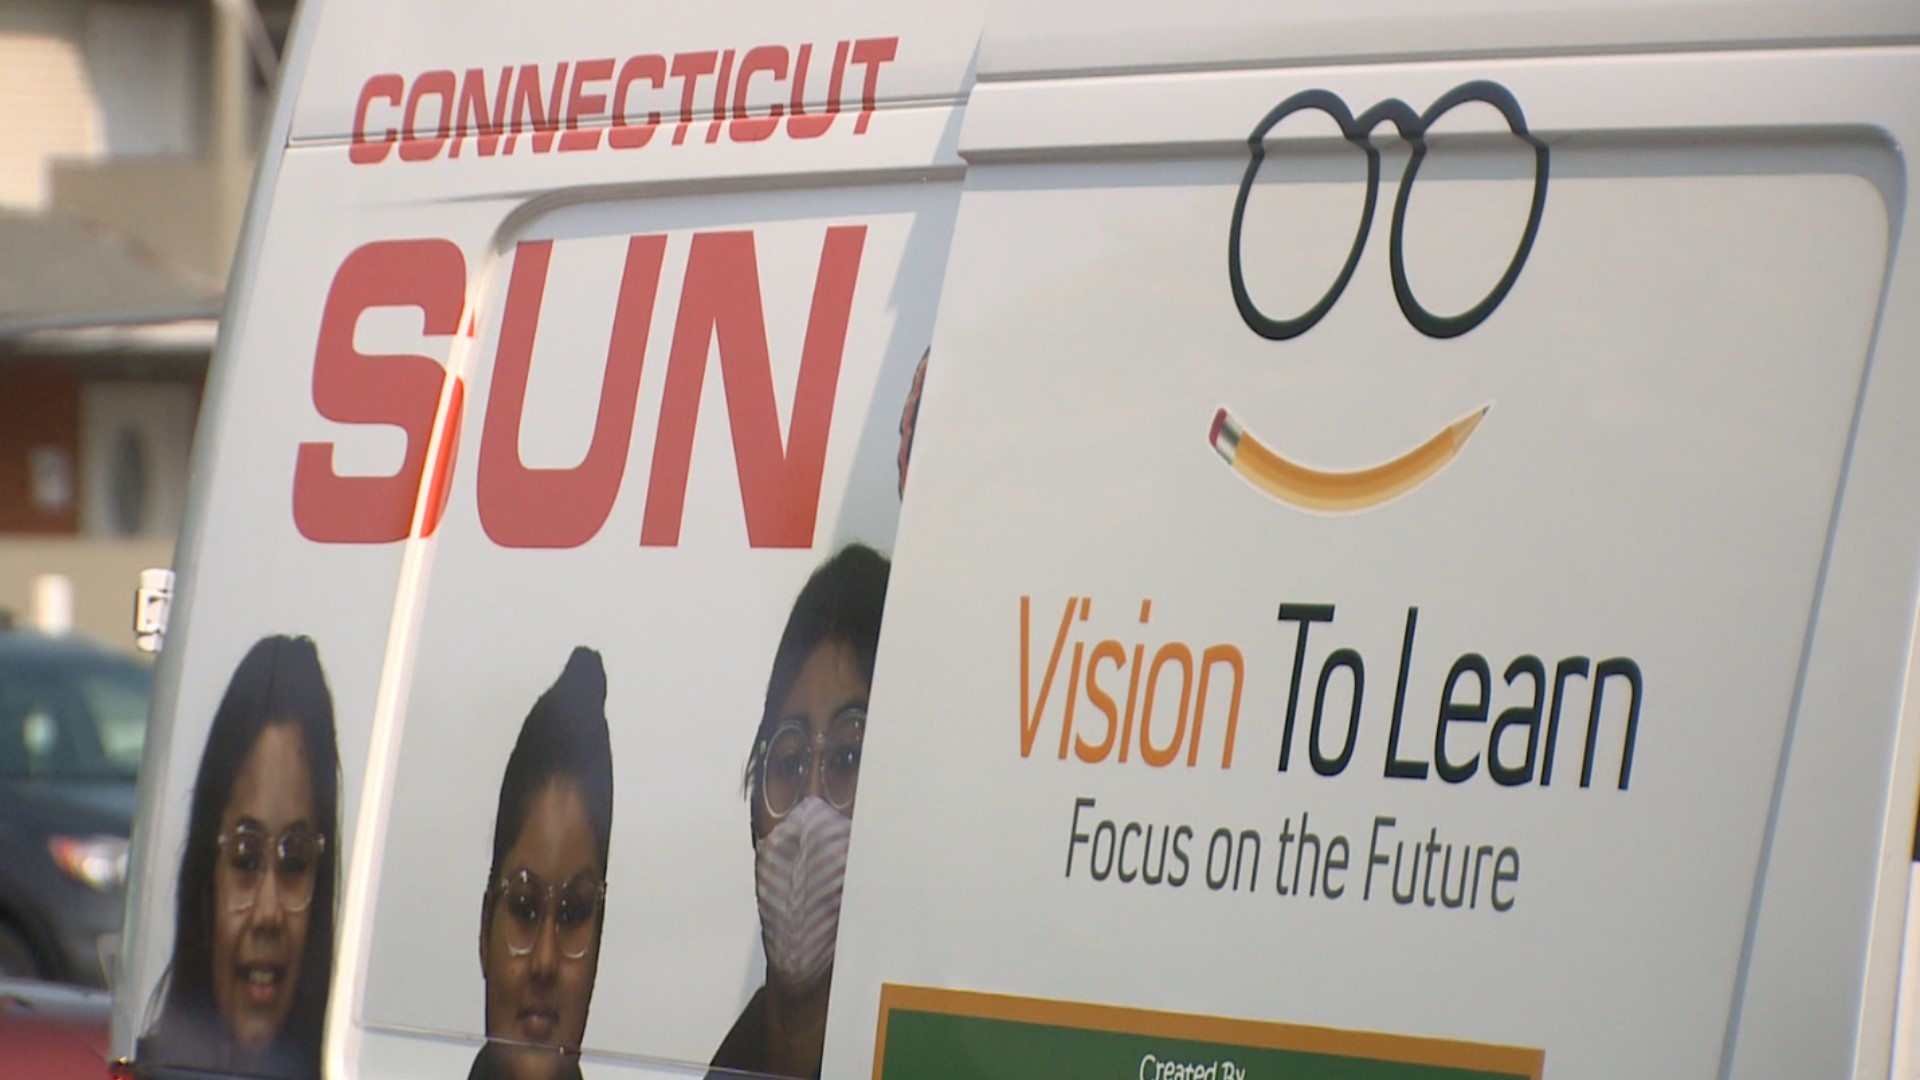 Keith McGilvery met the team from Vision to Learn in Hartford, a non-profit that makes sure kids who need glasses are ready for back-to-school success.